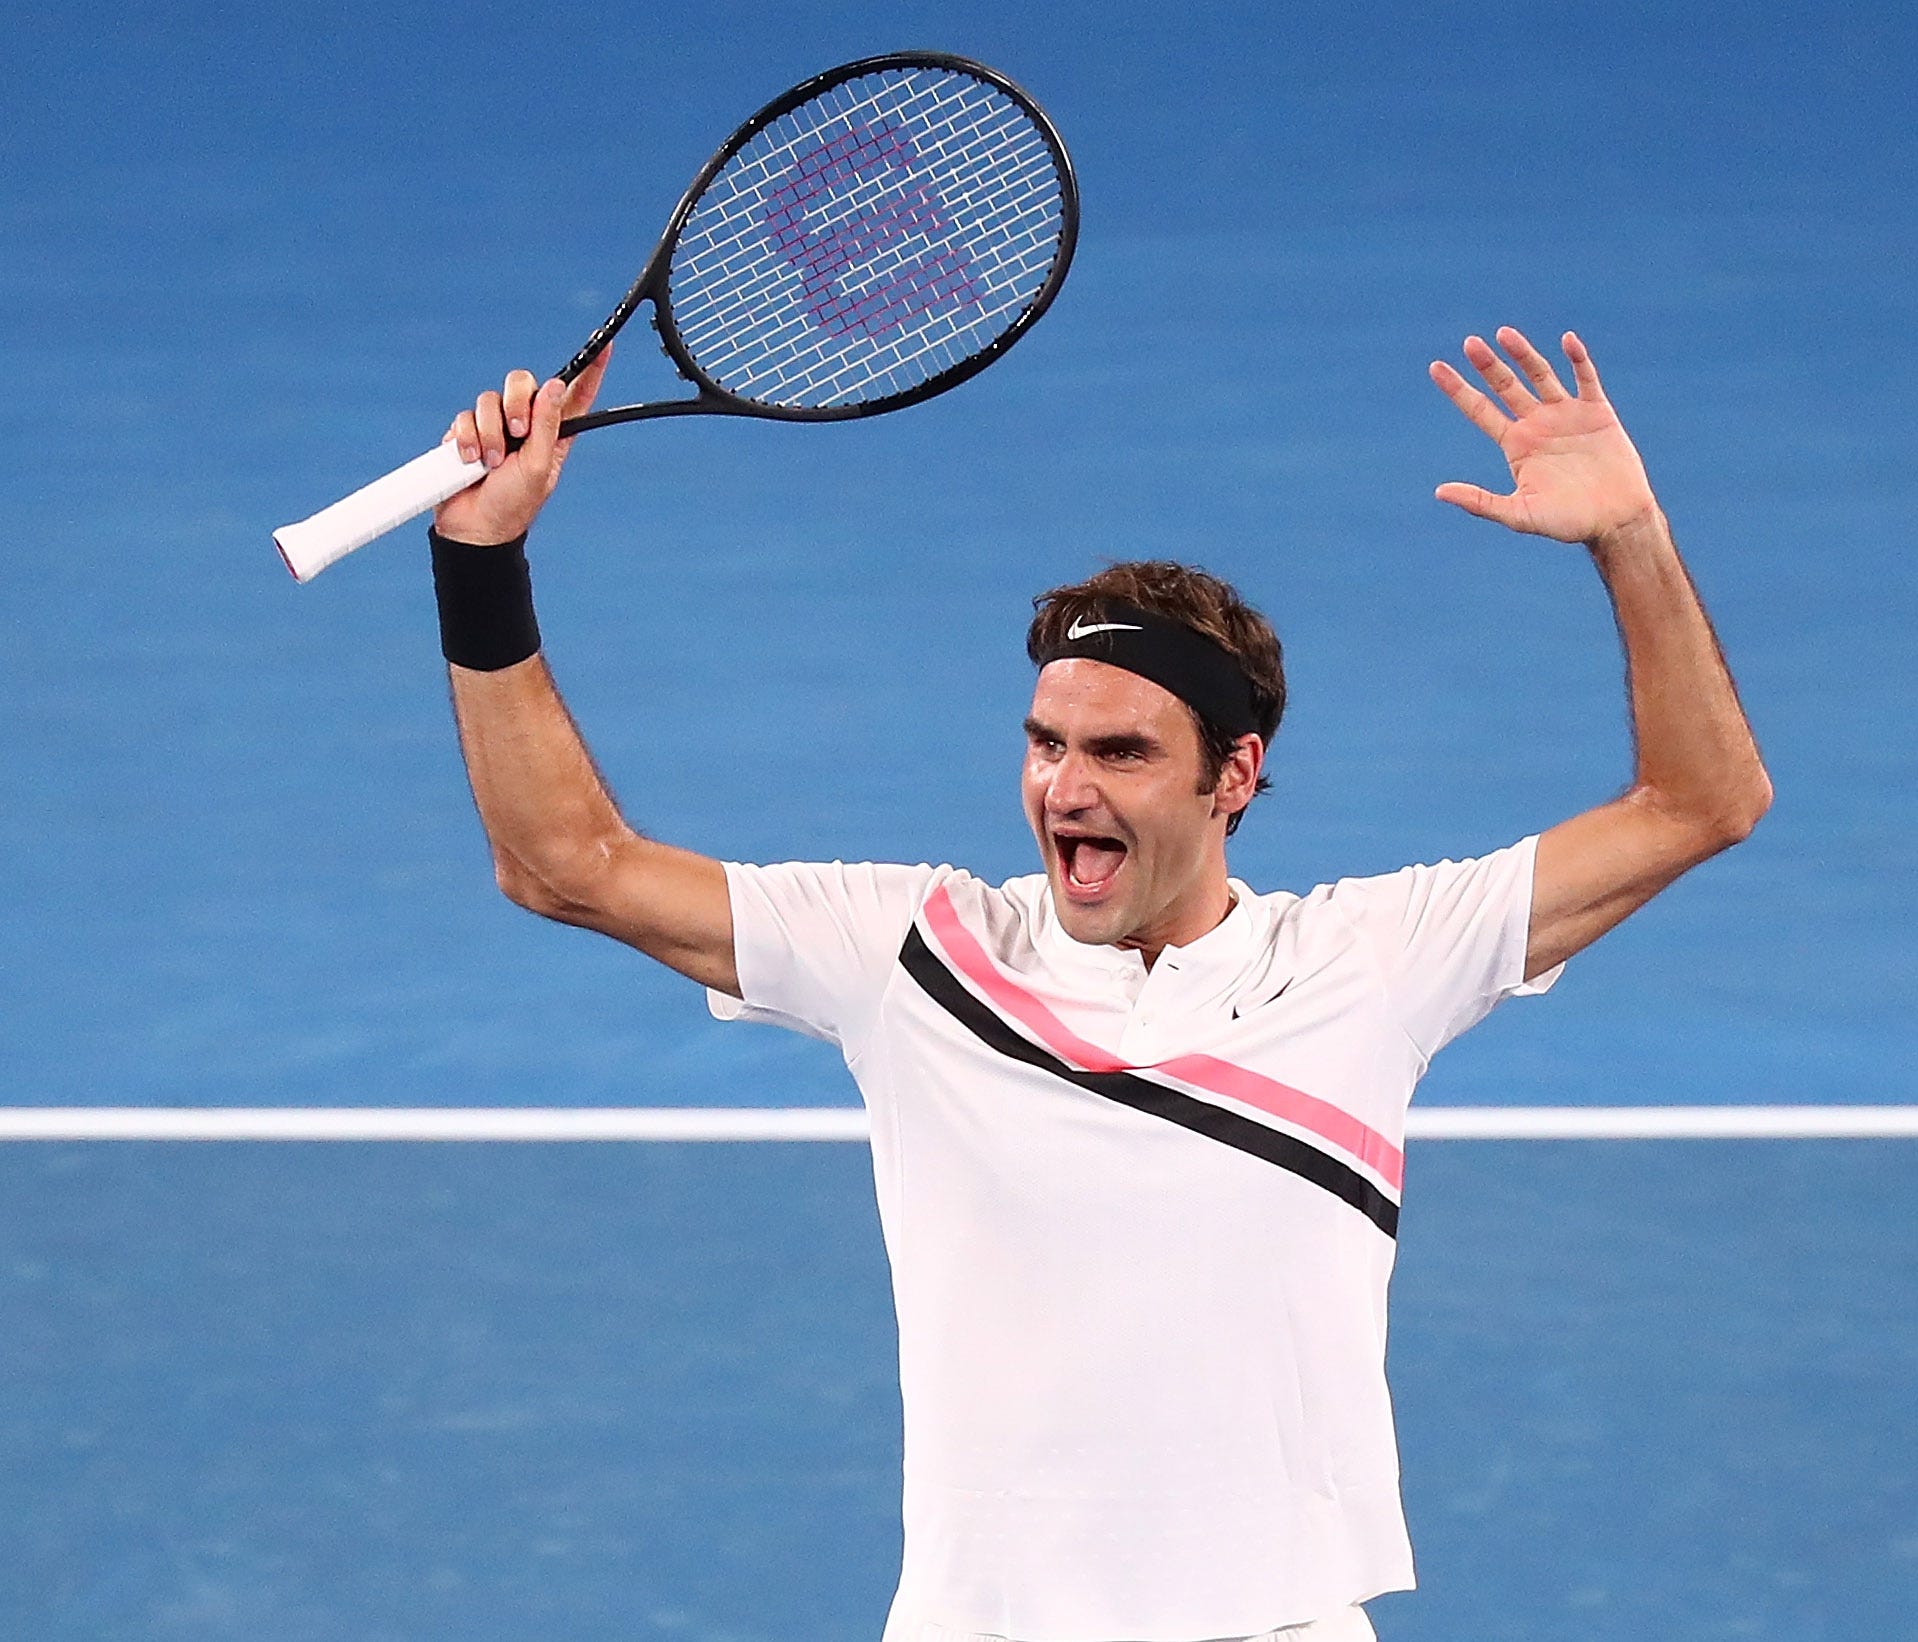 MELBOURNE, AUSTRALIA - JANUARY 28:  Roger Federer of Switzerland celebrates winning championship point in his men's singles final match against Marin Cilic of Croatia on day 14 of the 2018 Australian Open at Melbourne Park on January 28, 2018 in Melb